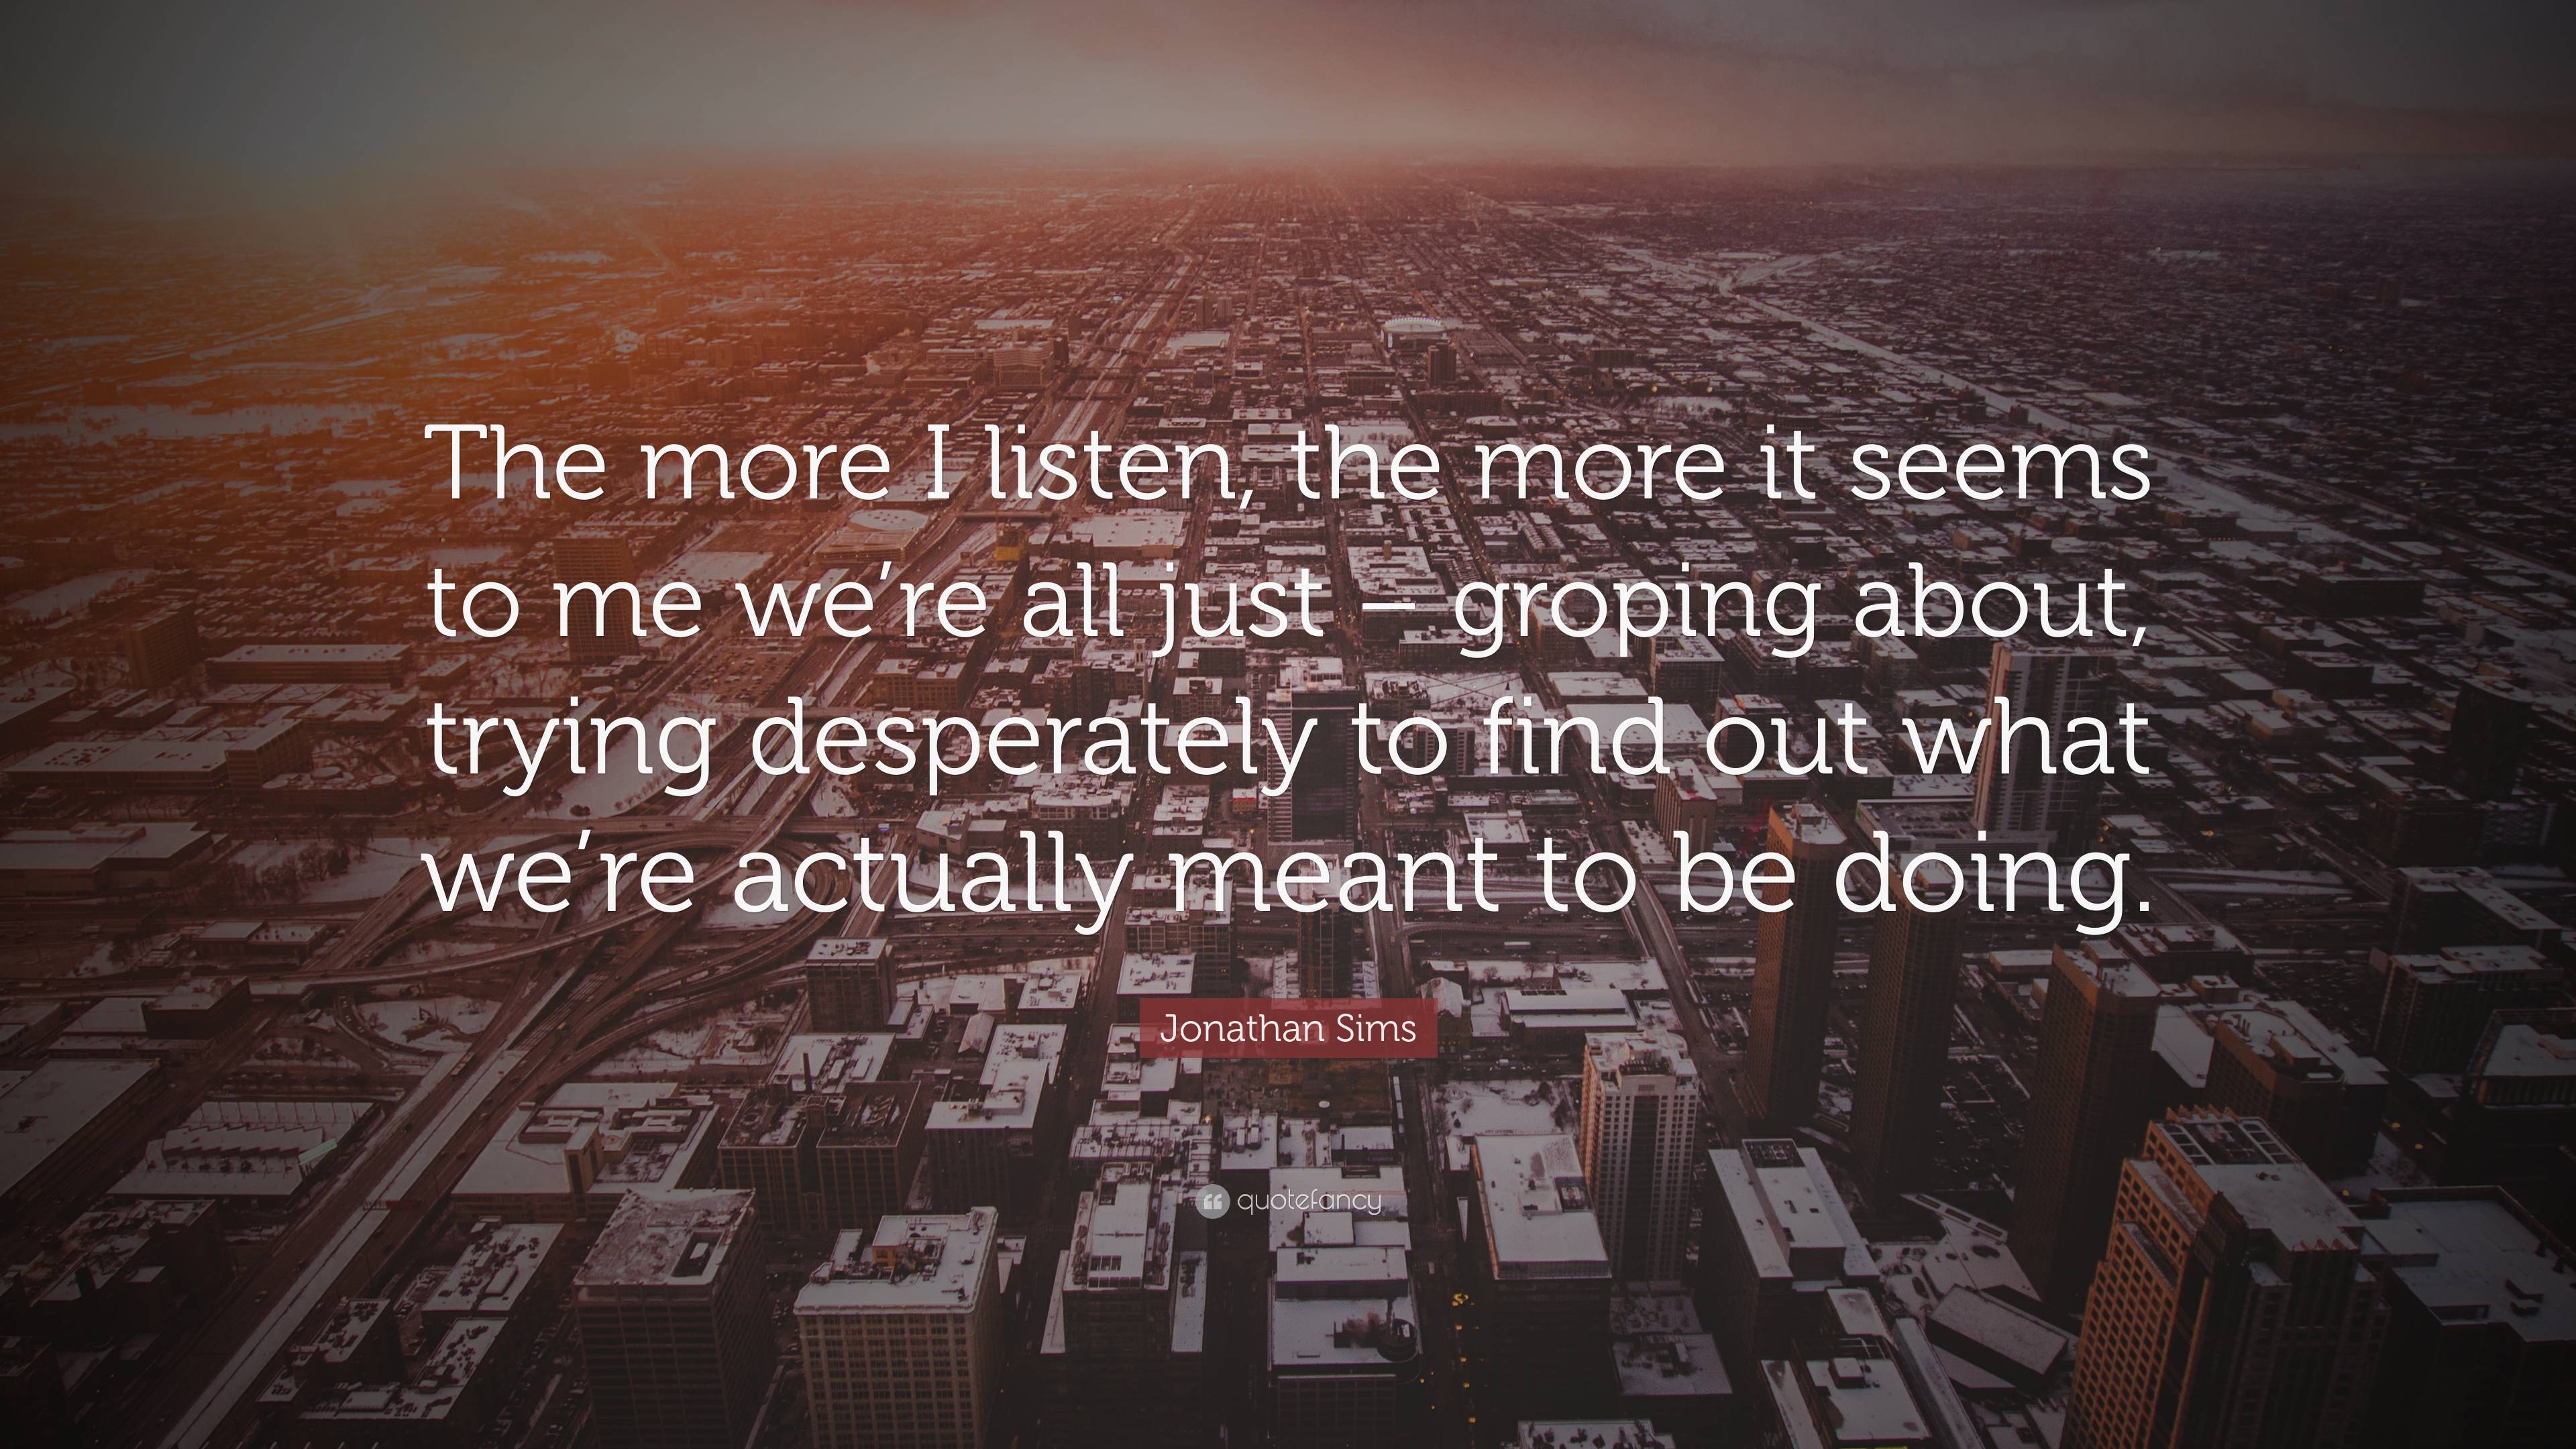 Jonathan Sims Quote: “The more I listen, the more it seems to me we’re ...